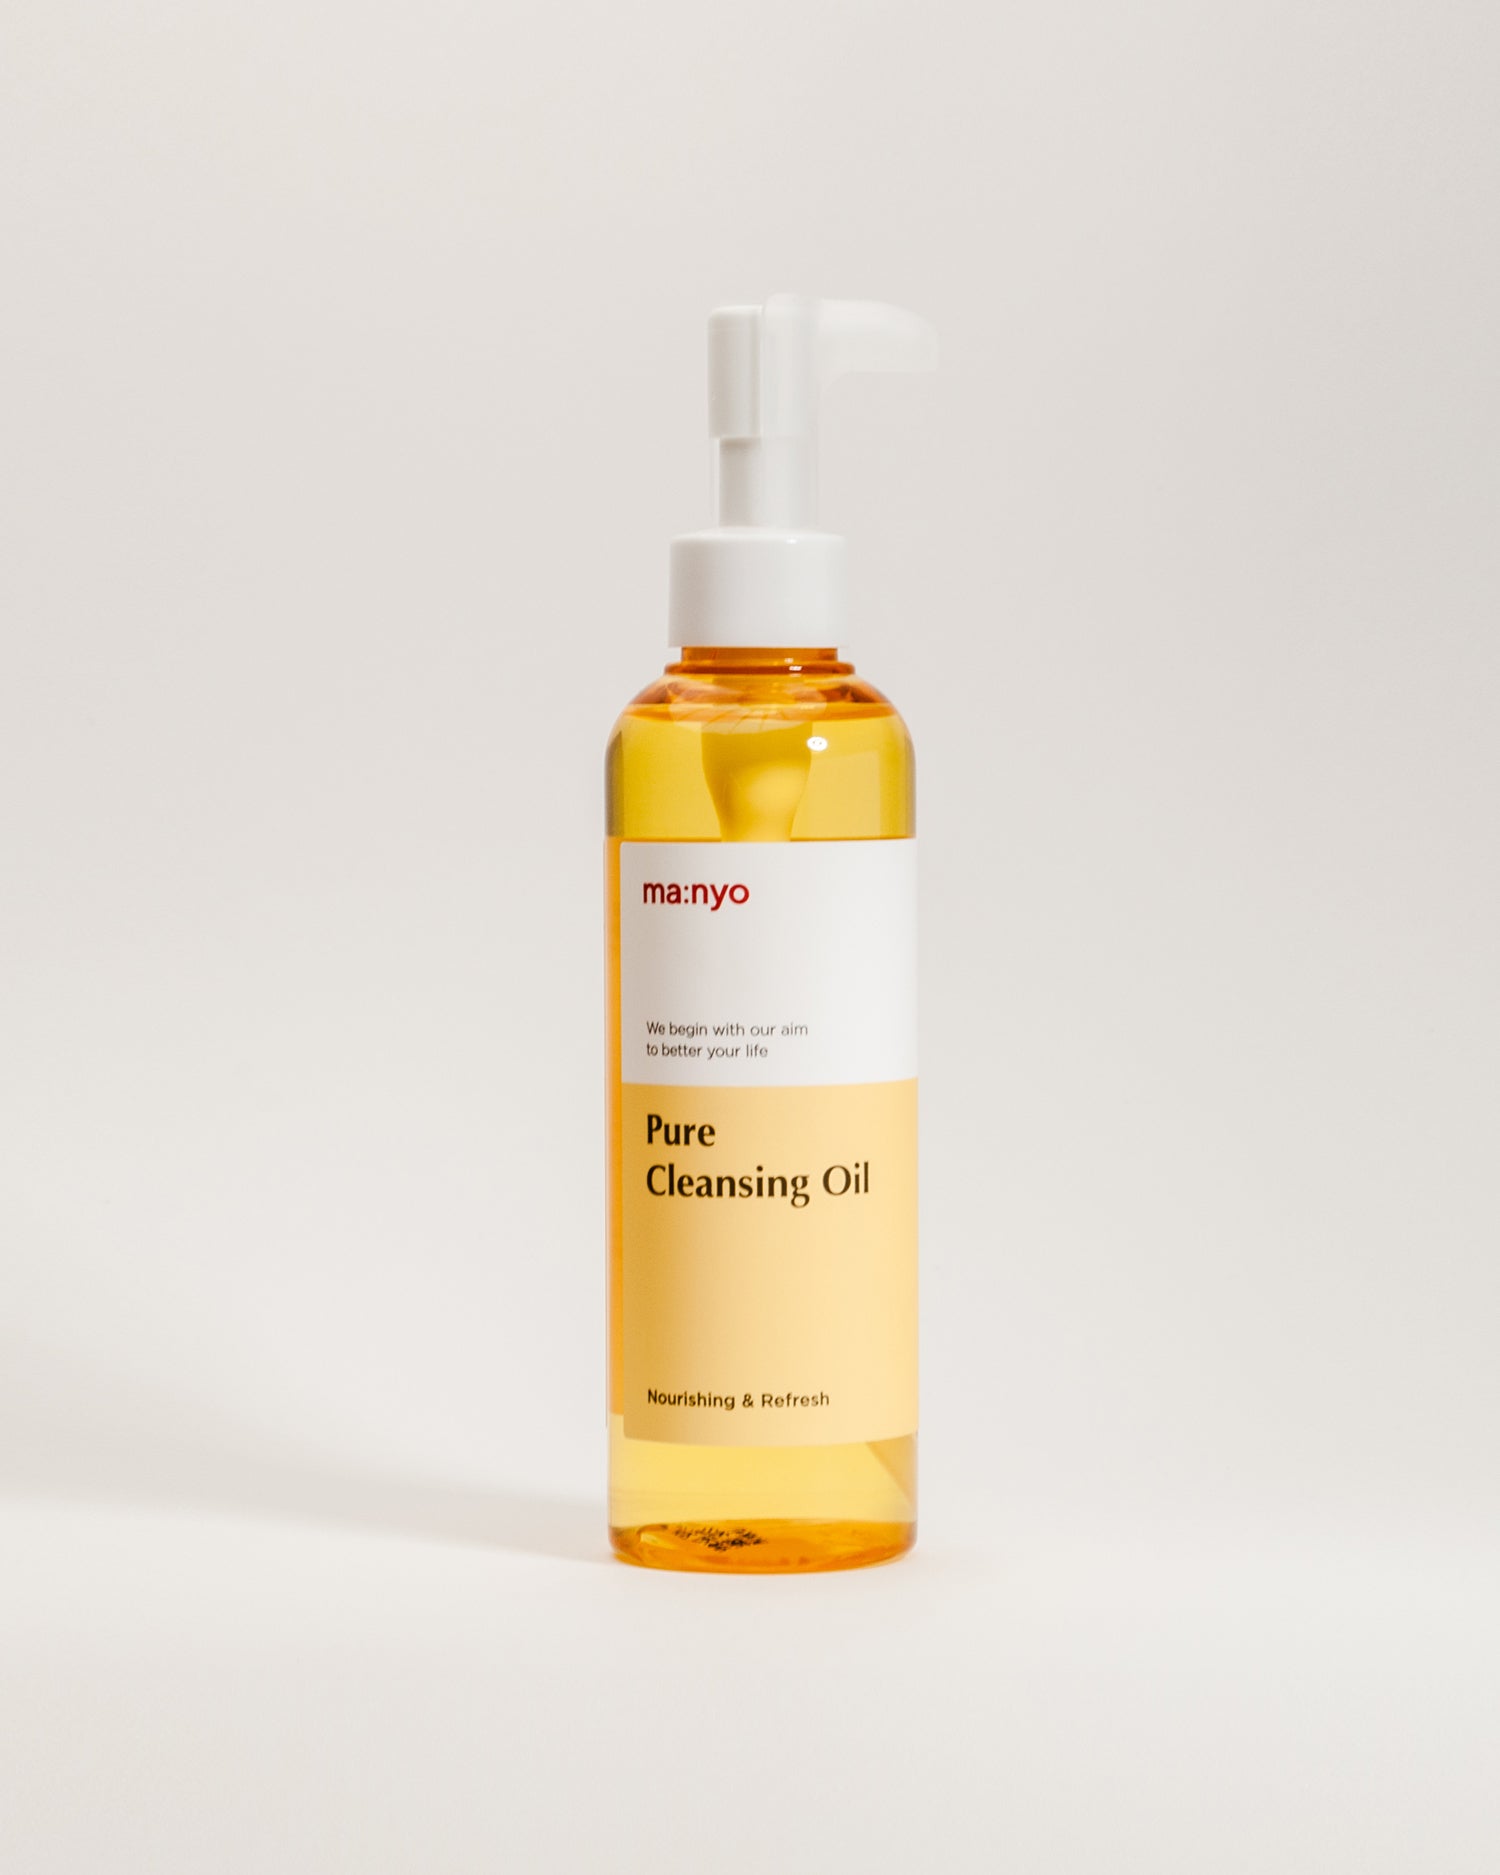 Manyo Factory Pure Cleansing Oil, 200ml